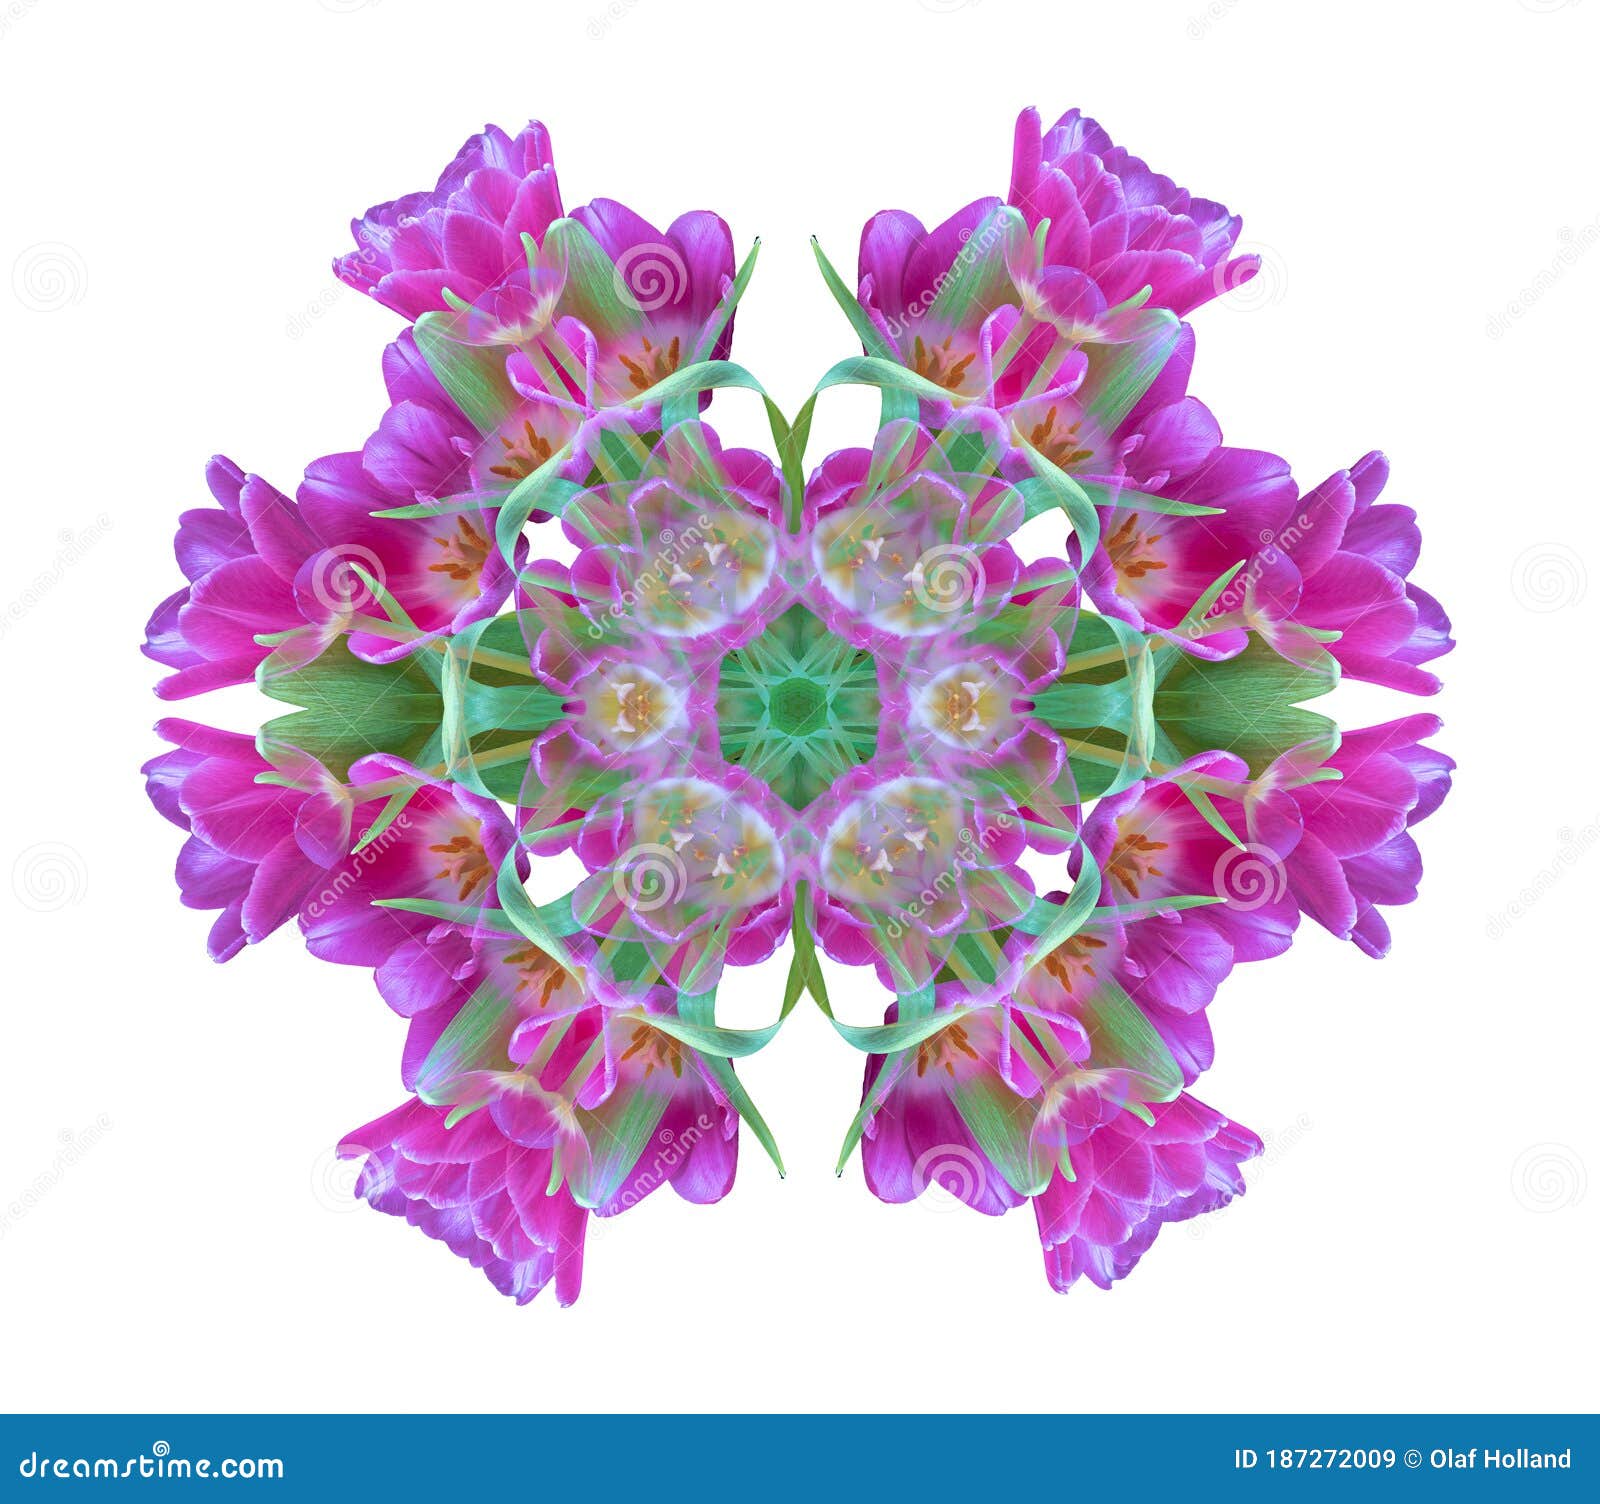 decorative geometrical color pattern made of macros of pink green tulips on white background